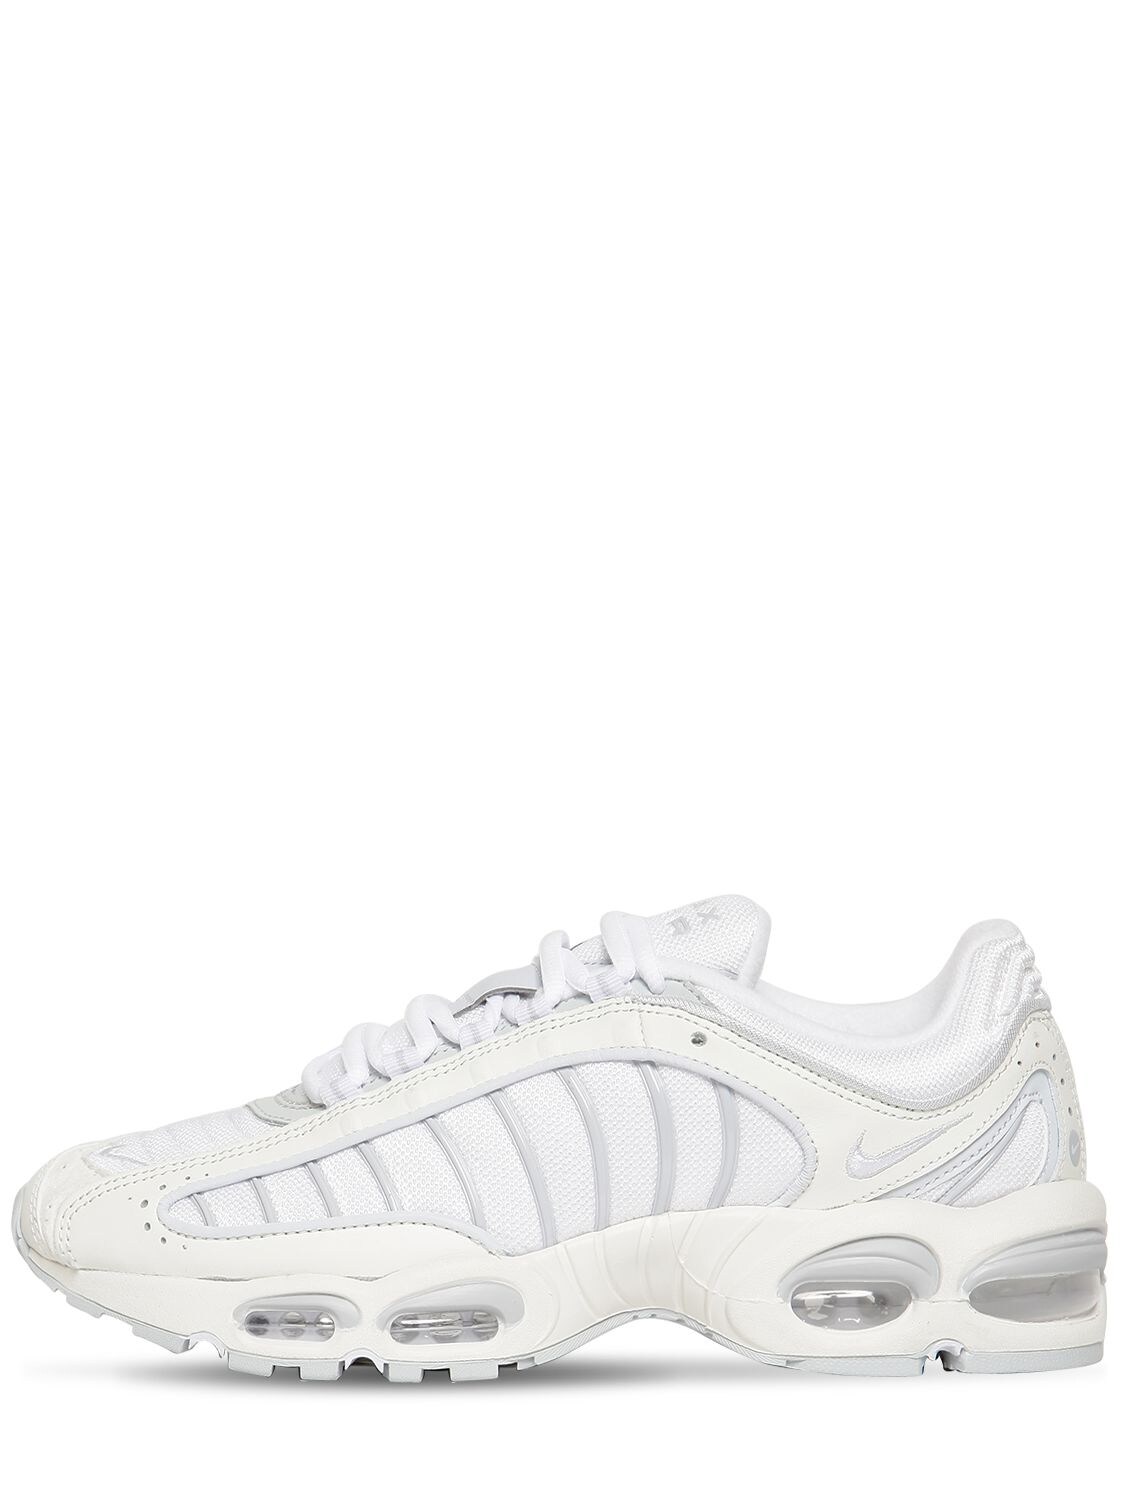 Nike Air Max Tailwind Iv Sneakers In White Modesens